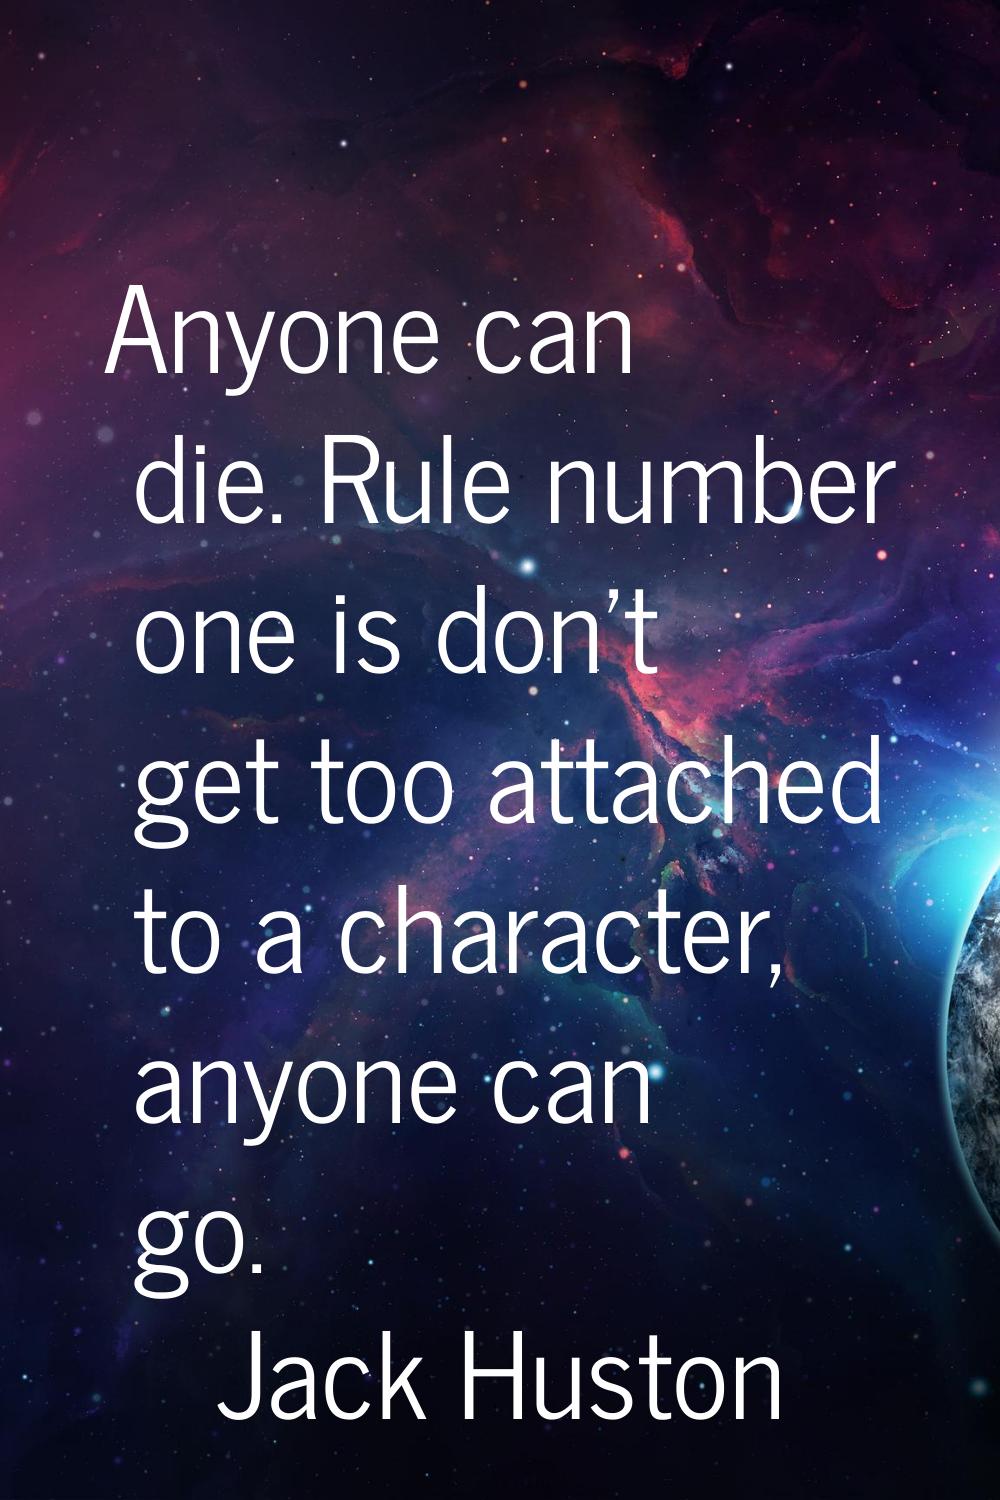 Anyone can die. Rule number one is don't get too attached to a character, anyone can go.